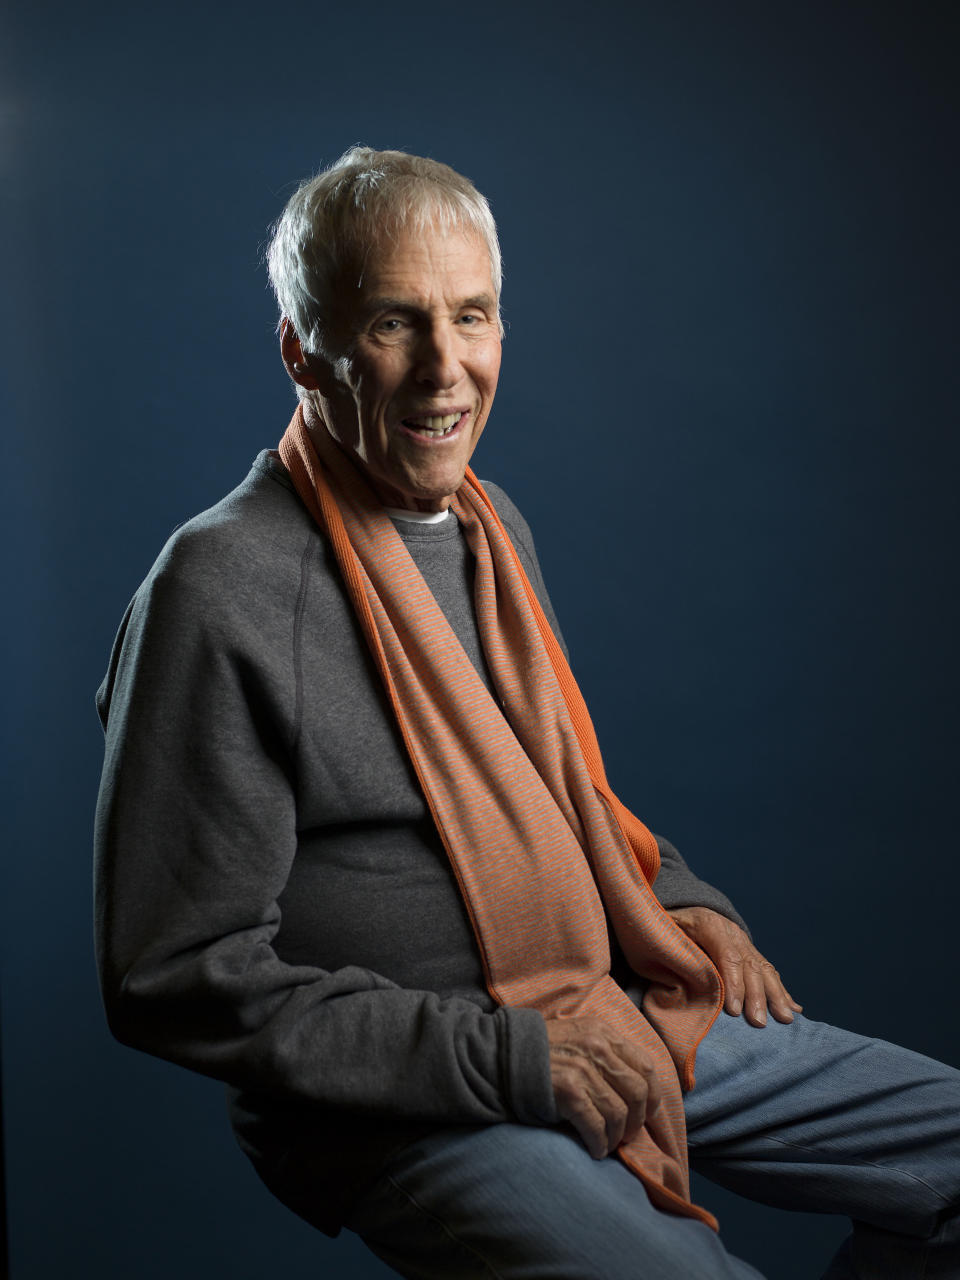 This May 6, 2013 photo shows composer Burt Bacharach posing for a portrait in promotion of his memoir, "Anyone Who Had A Heart: My Life and Music," in New York. (Photo by Scott Gries/Invision/AP)